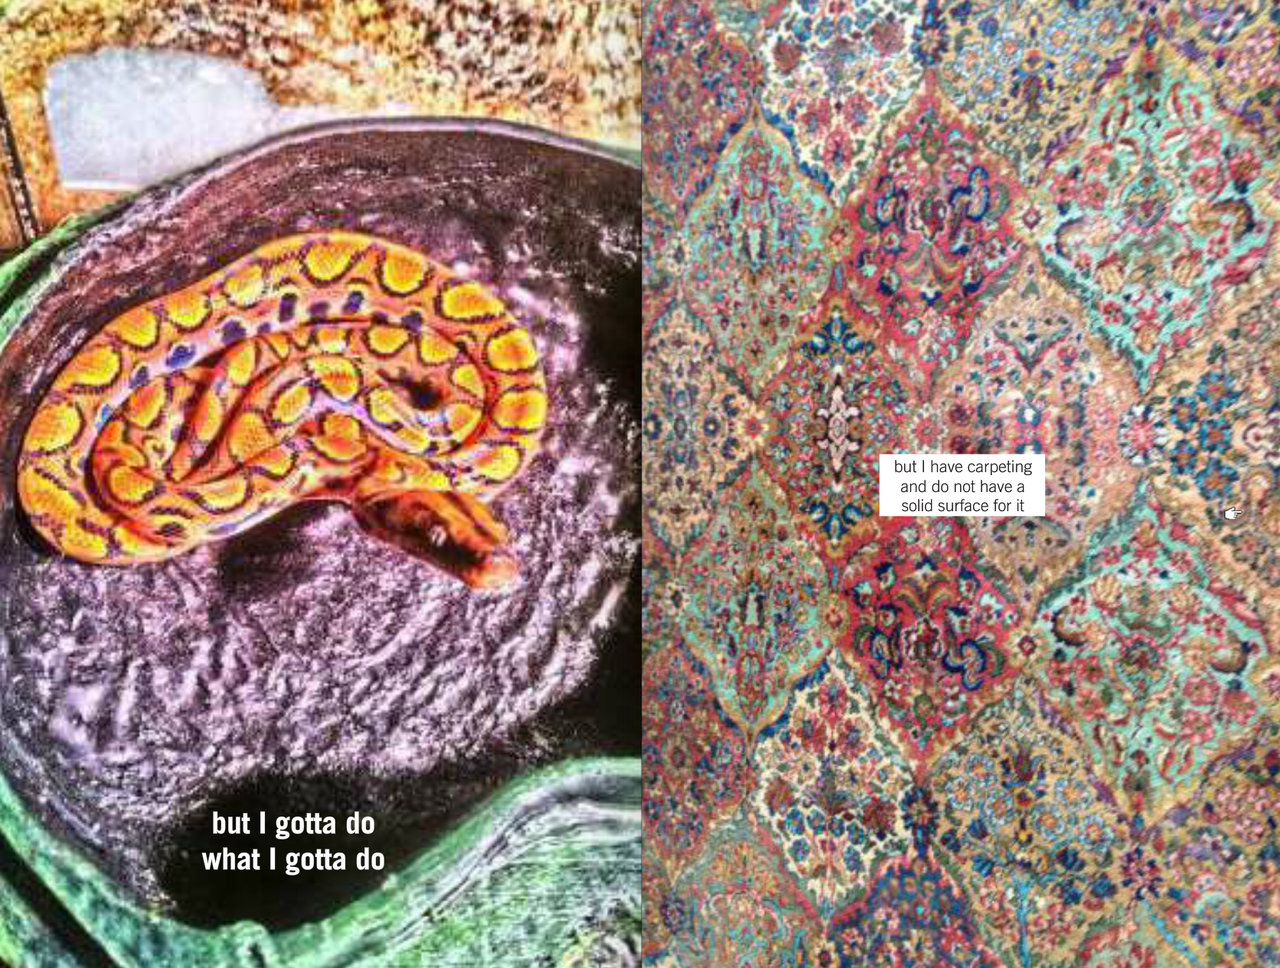 A spread from the book, showing a pet snake with the phrase: but I gotta do what I gotta do; and an ornamental rug with the phrase: but I have carpeting and do not have a solid surface for it